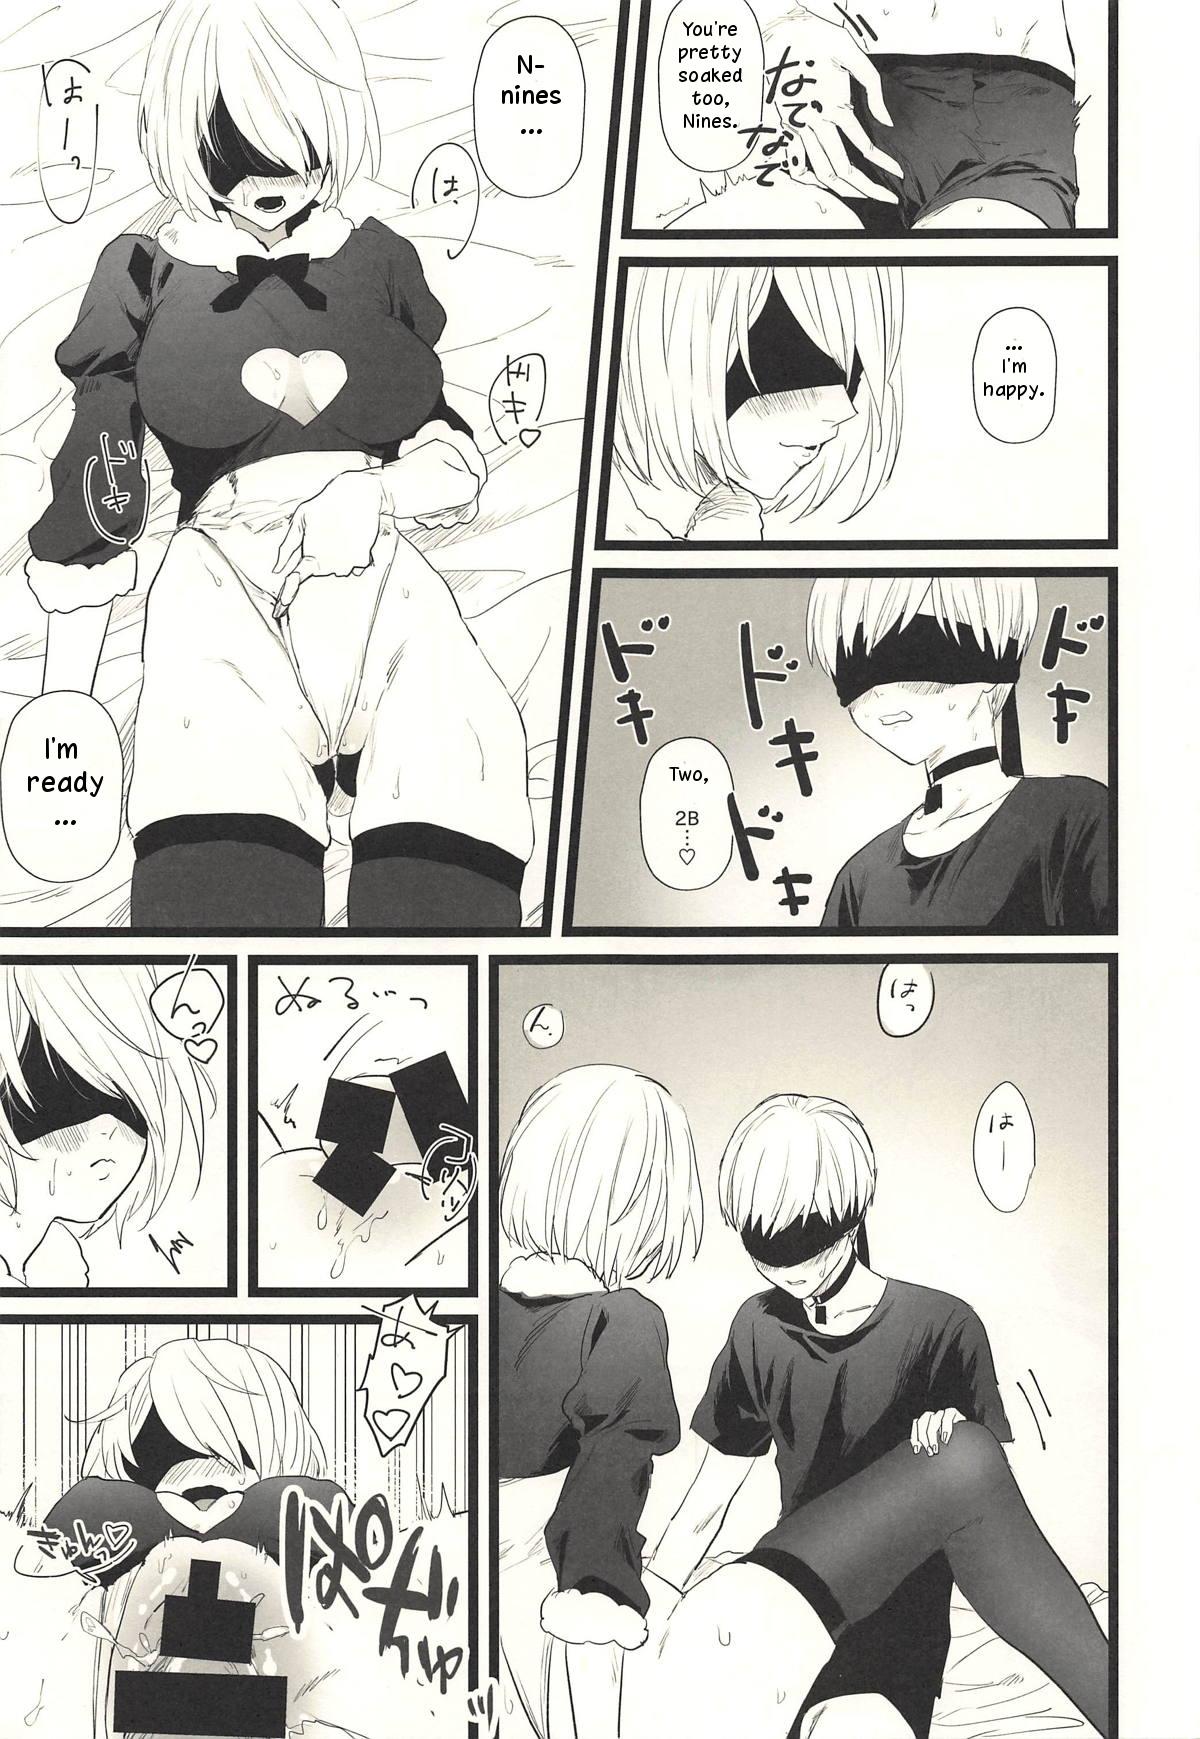 Doggystyle ONE MORE TIME - Nier automata Hotporn - Page 10